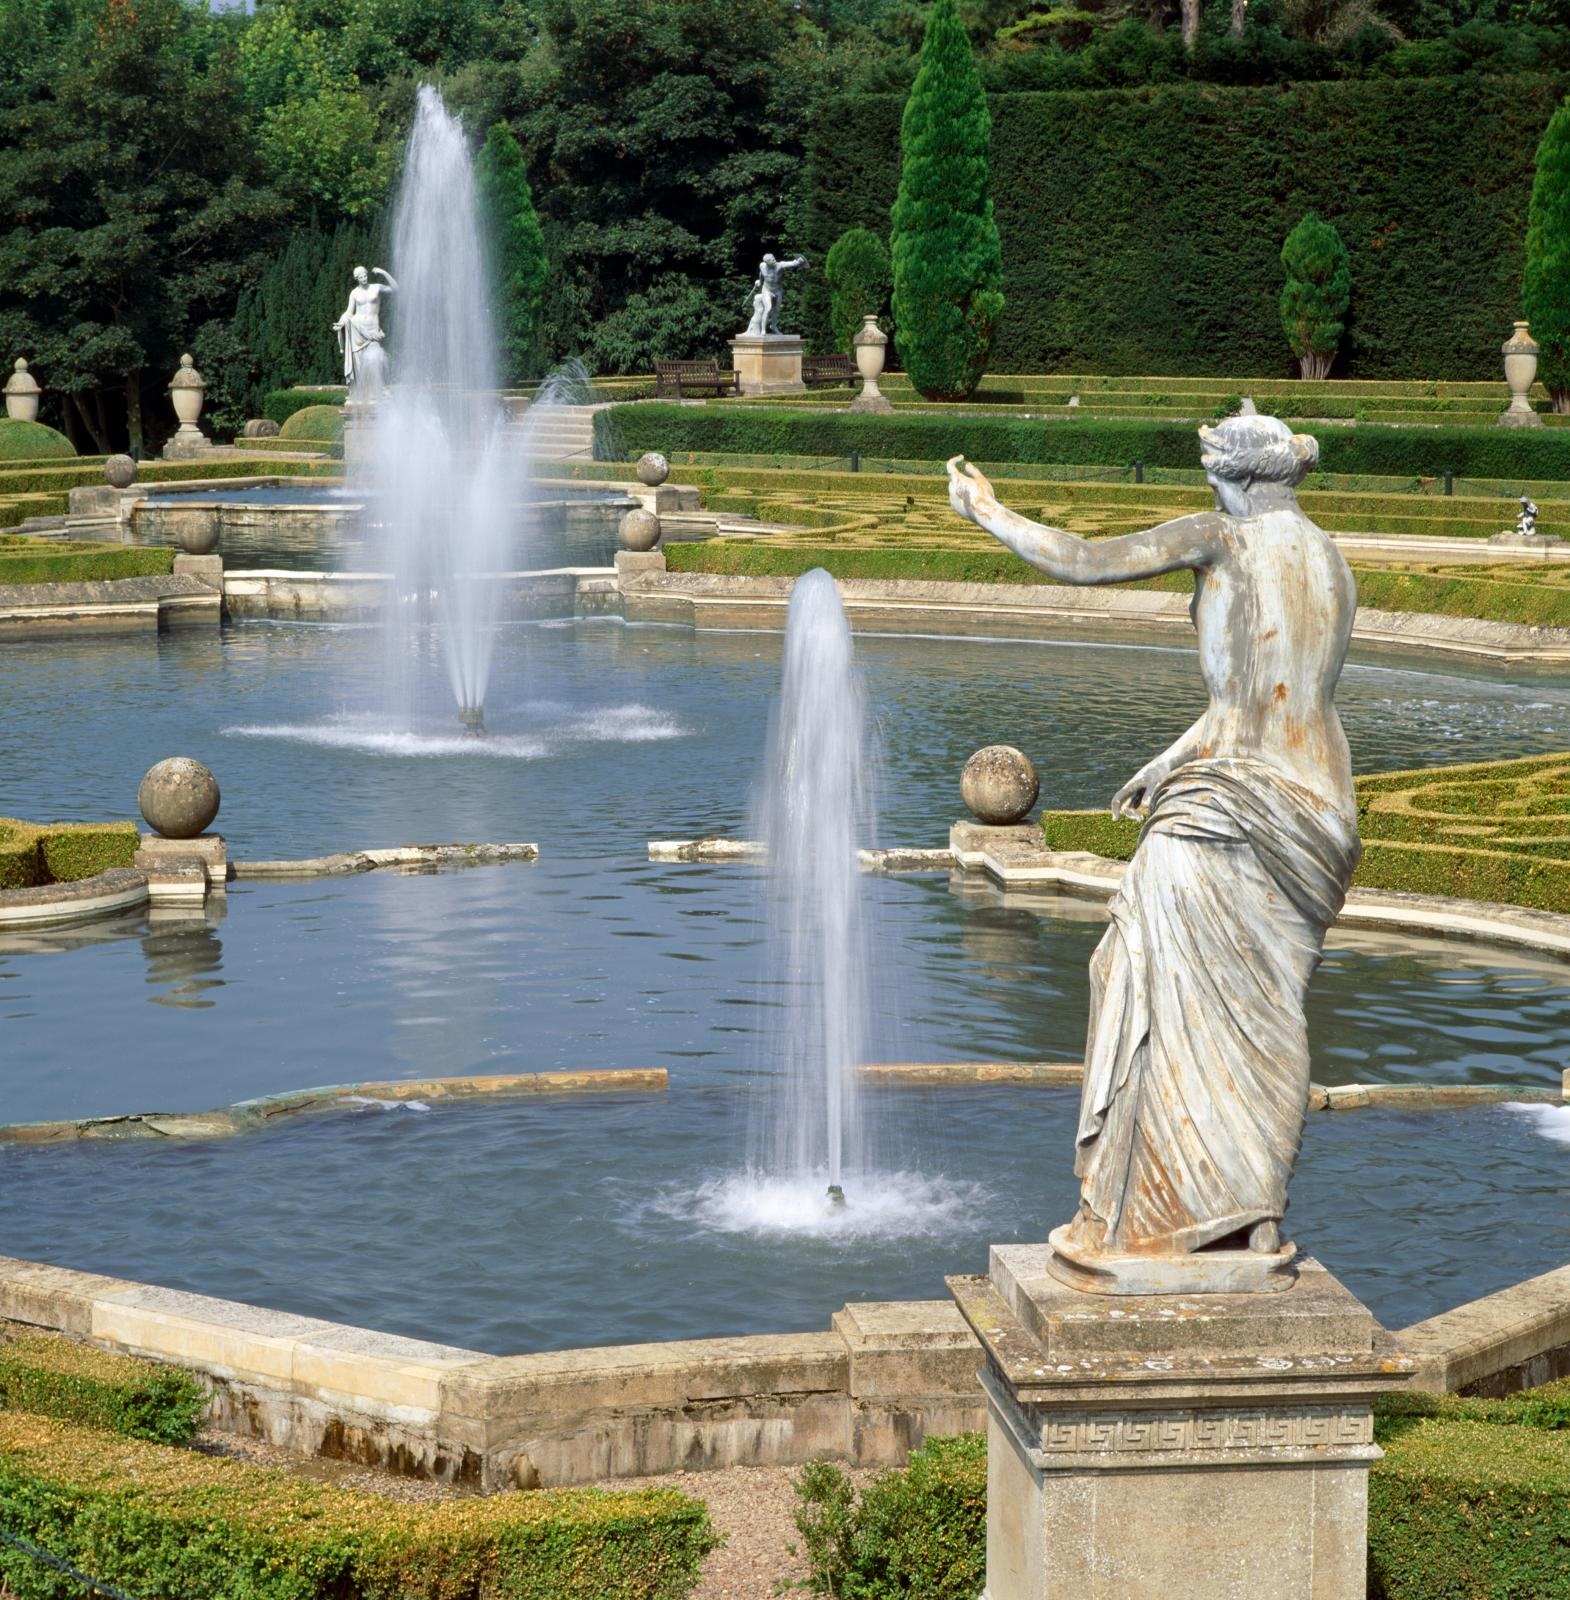 Fountains and ponds with stone statues located around them